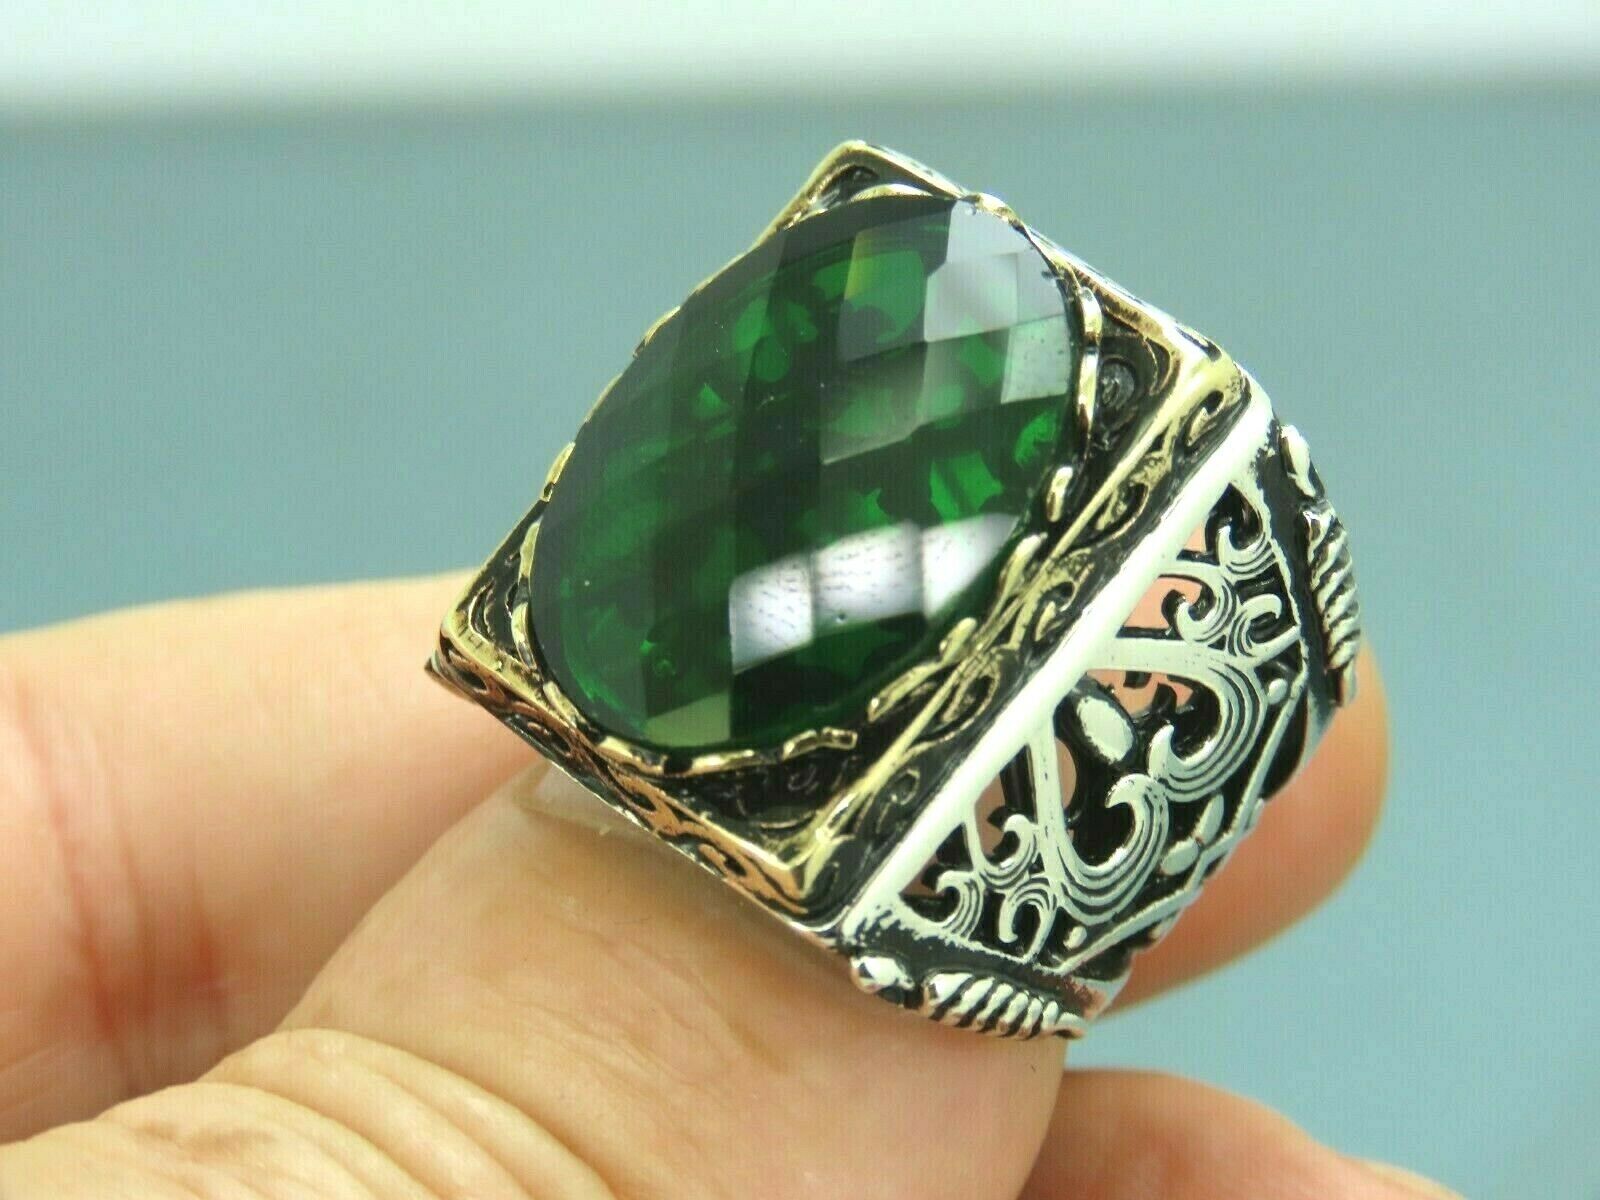 Presenting 35 Ct Silver Ring ~ With Natural Emerald Stone Afghan Mined !